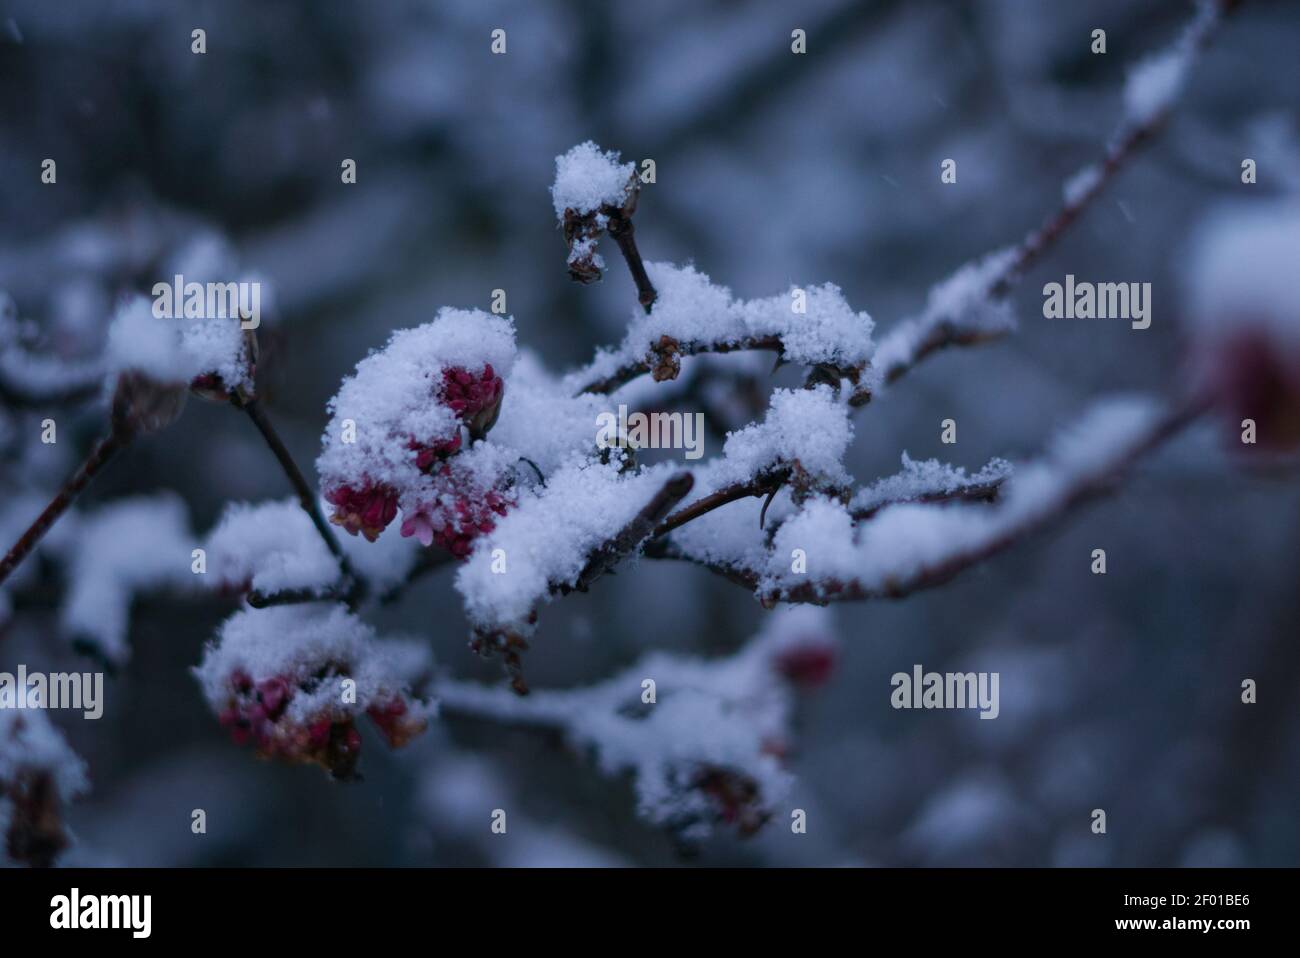 Blossom covered by snow Stock Photo